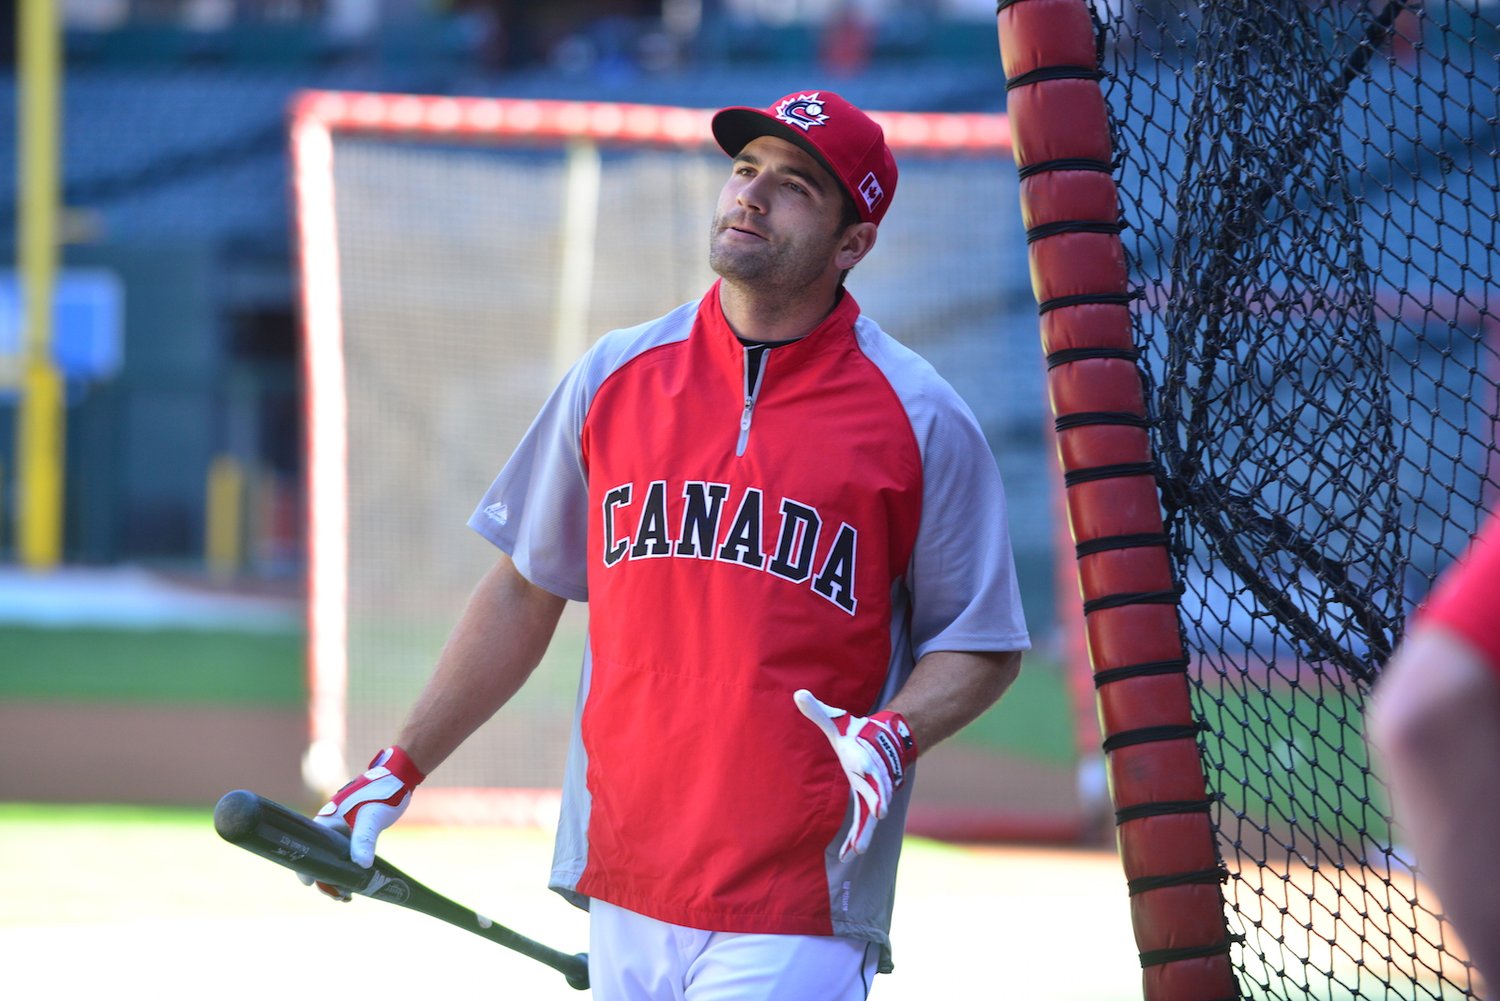 Elliott: Votto missing playing for Canada in WBC — Canadian